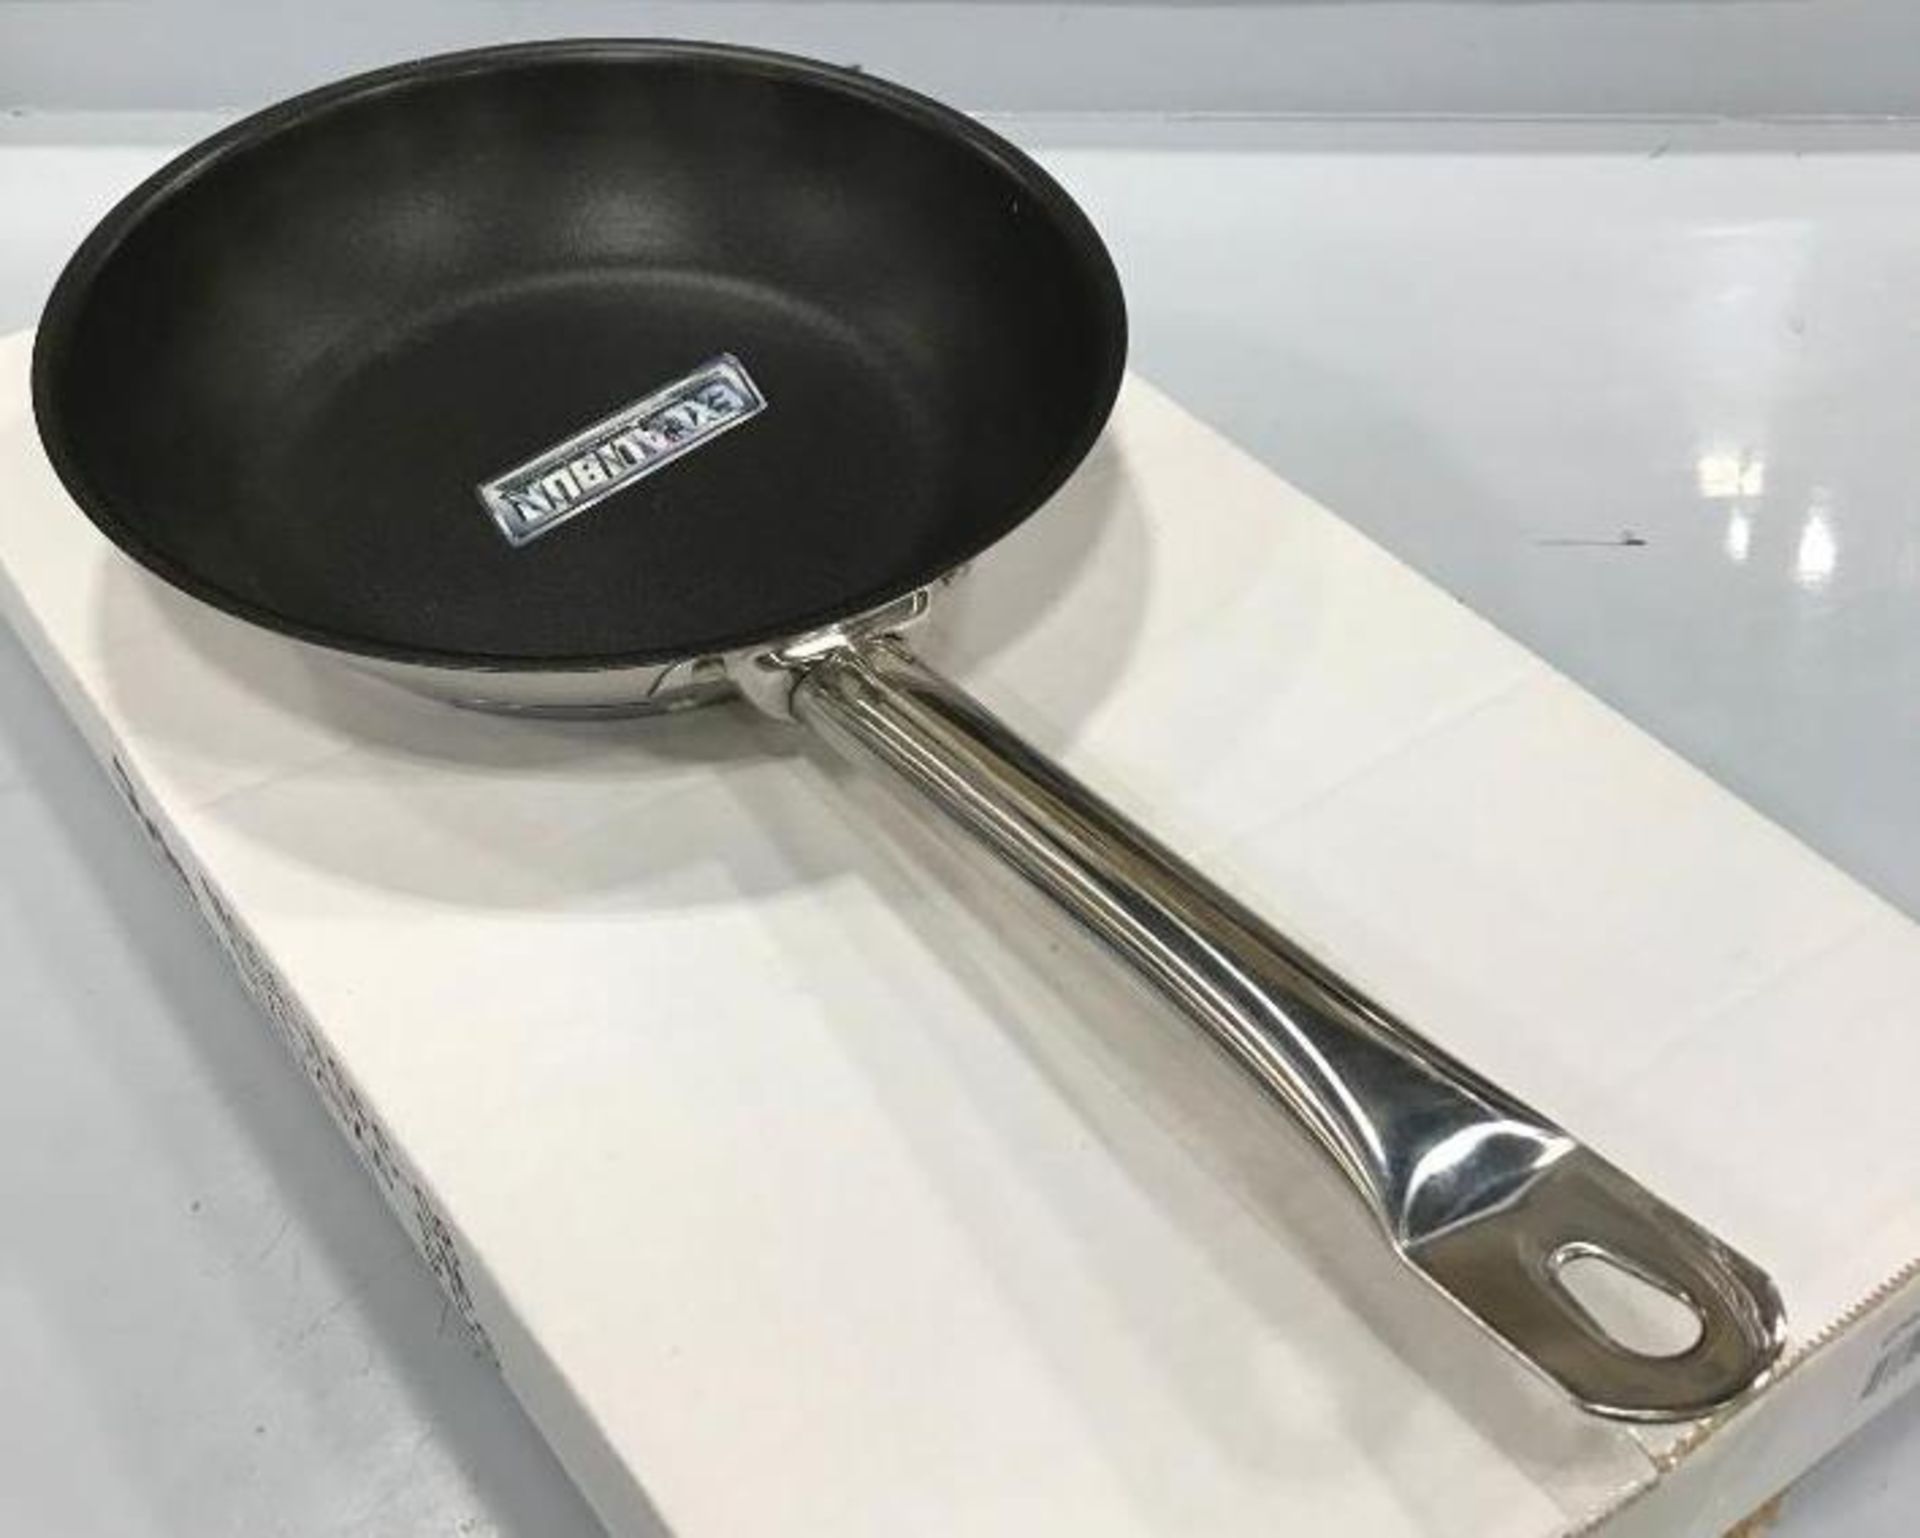 8" STAINLESS STEEL INDUCTION FRYING PAN W/ EXCALIBUR NON-STICK COATING - UPDATE SFC-08 - NEW